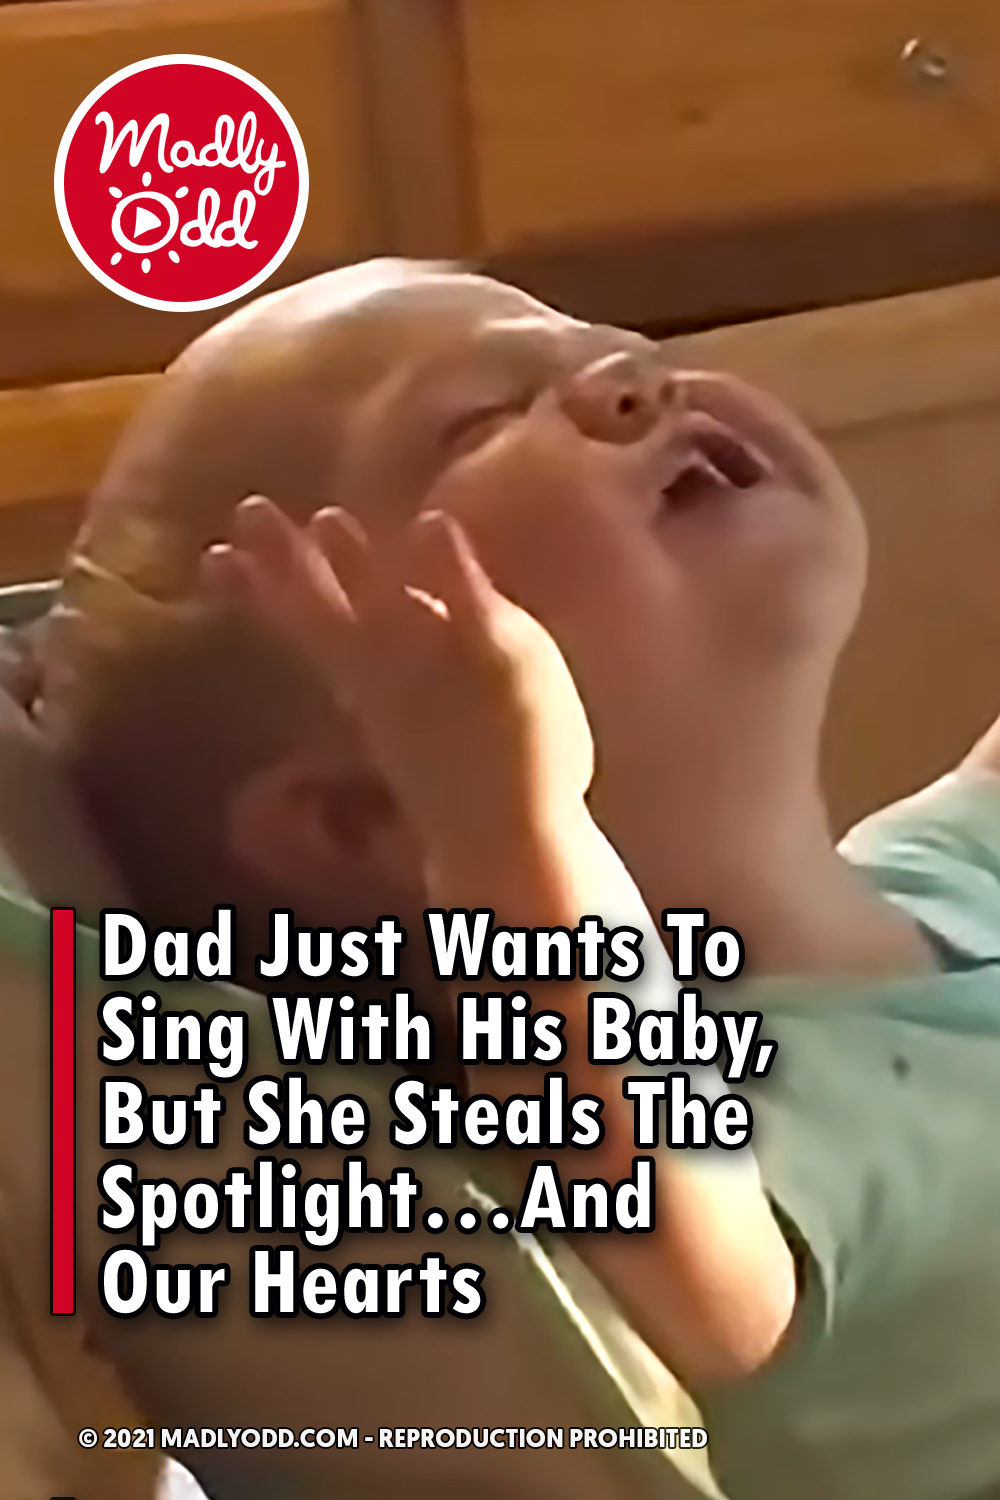 Dad Just Wants To Sing With His Baby, But She Steals The Spotlight...And Our Hearts